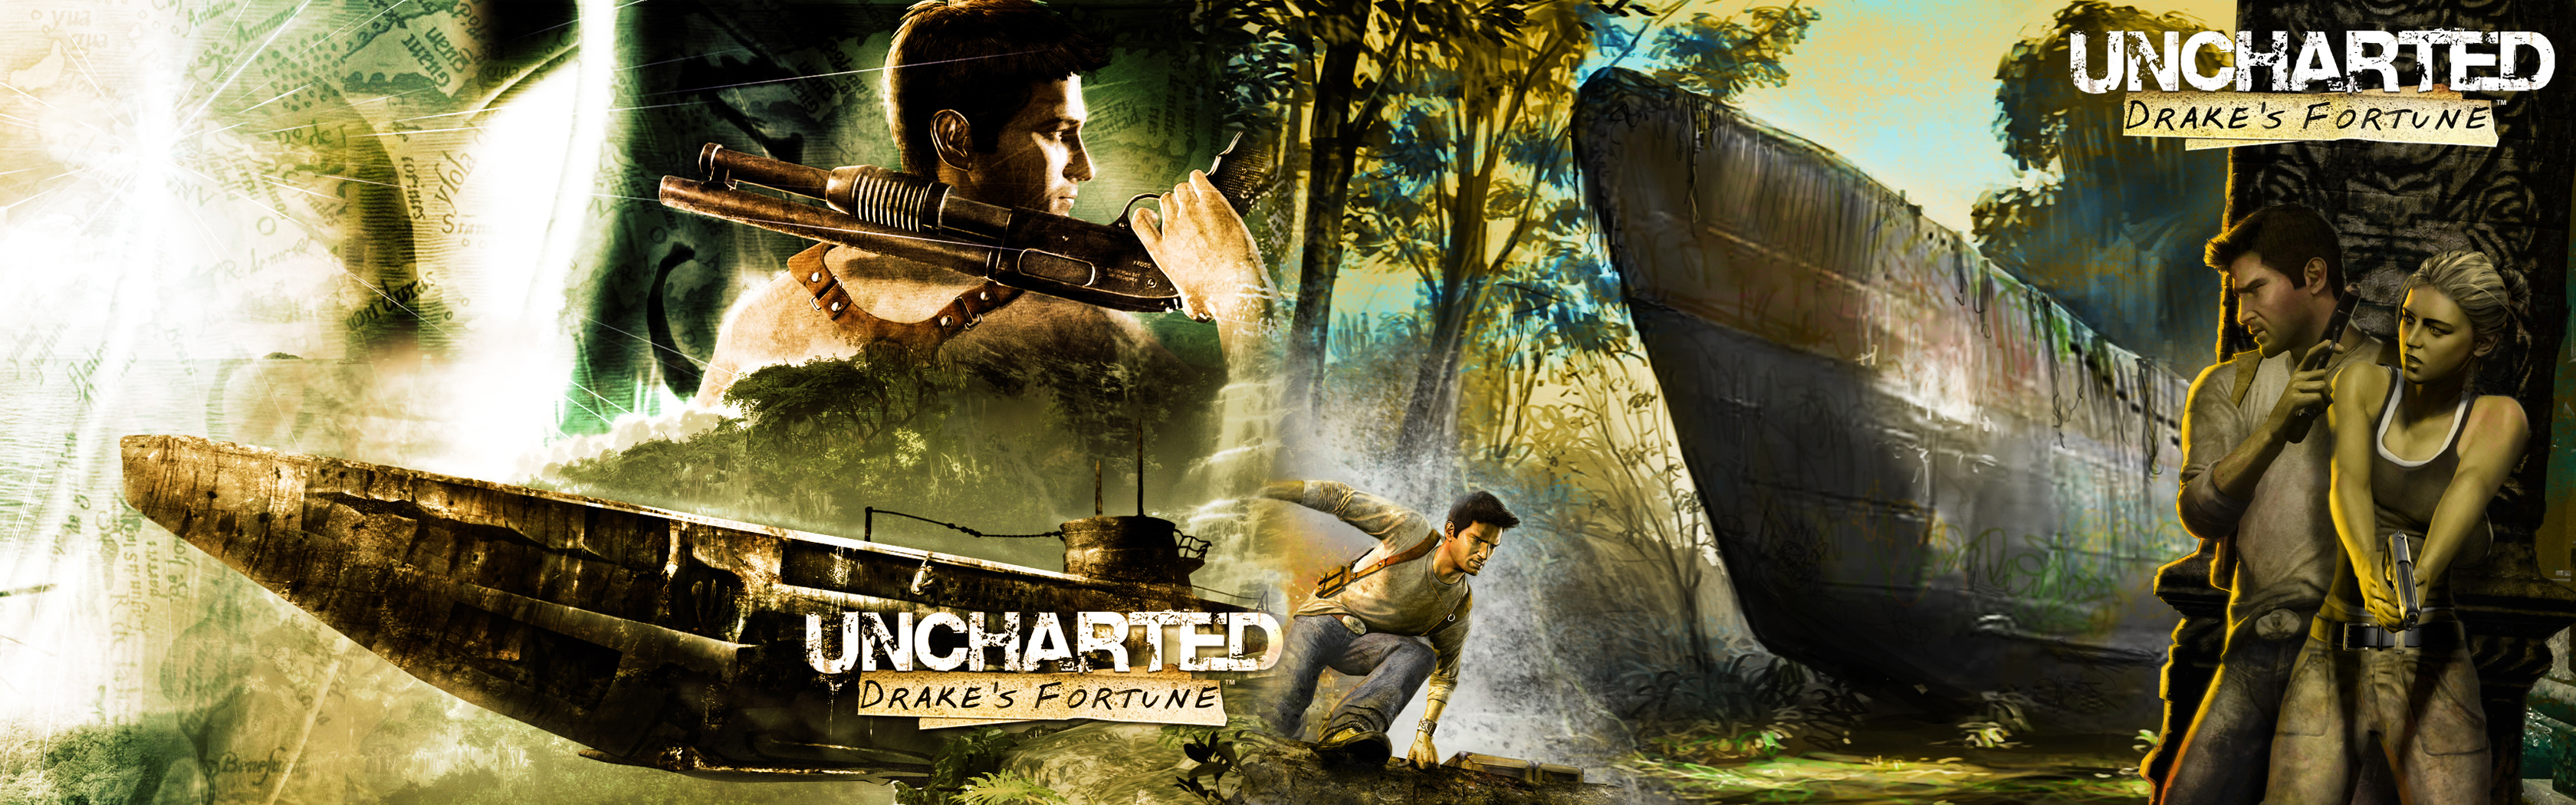 Video Game Uncharted Drakes Fortune 3360x1050